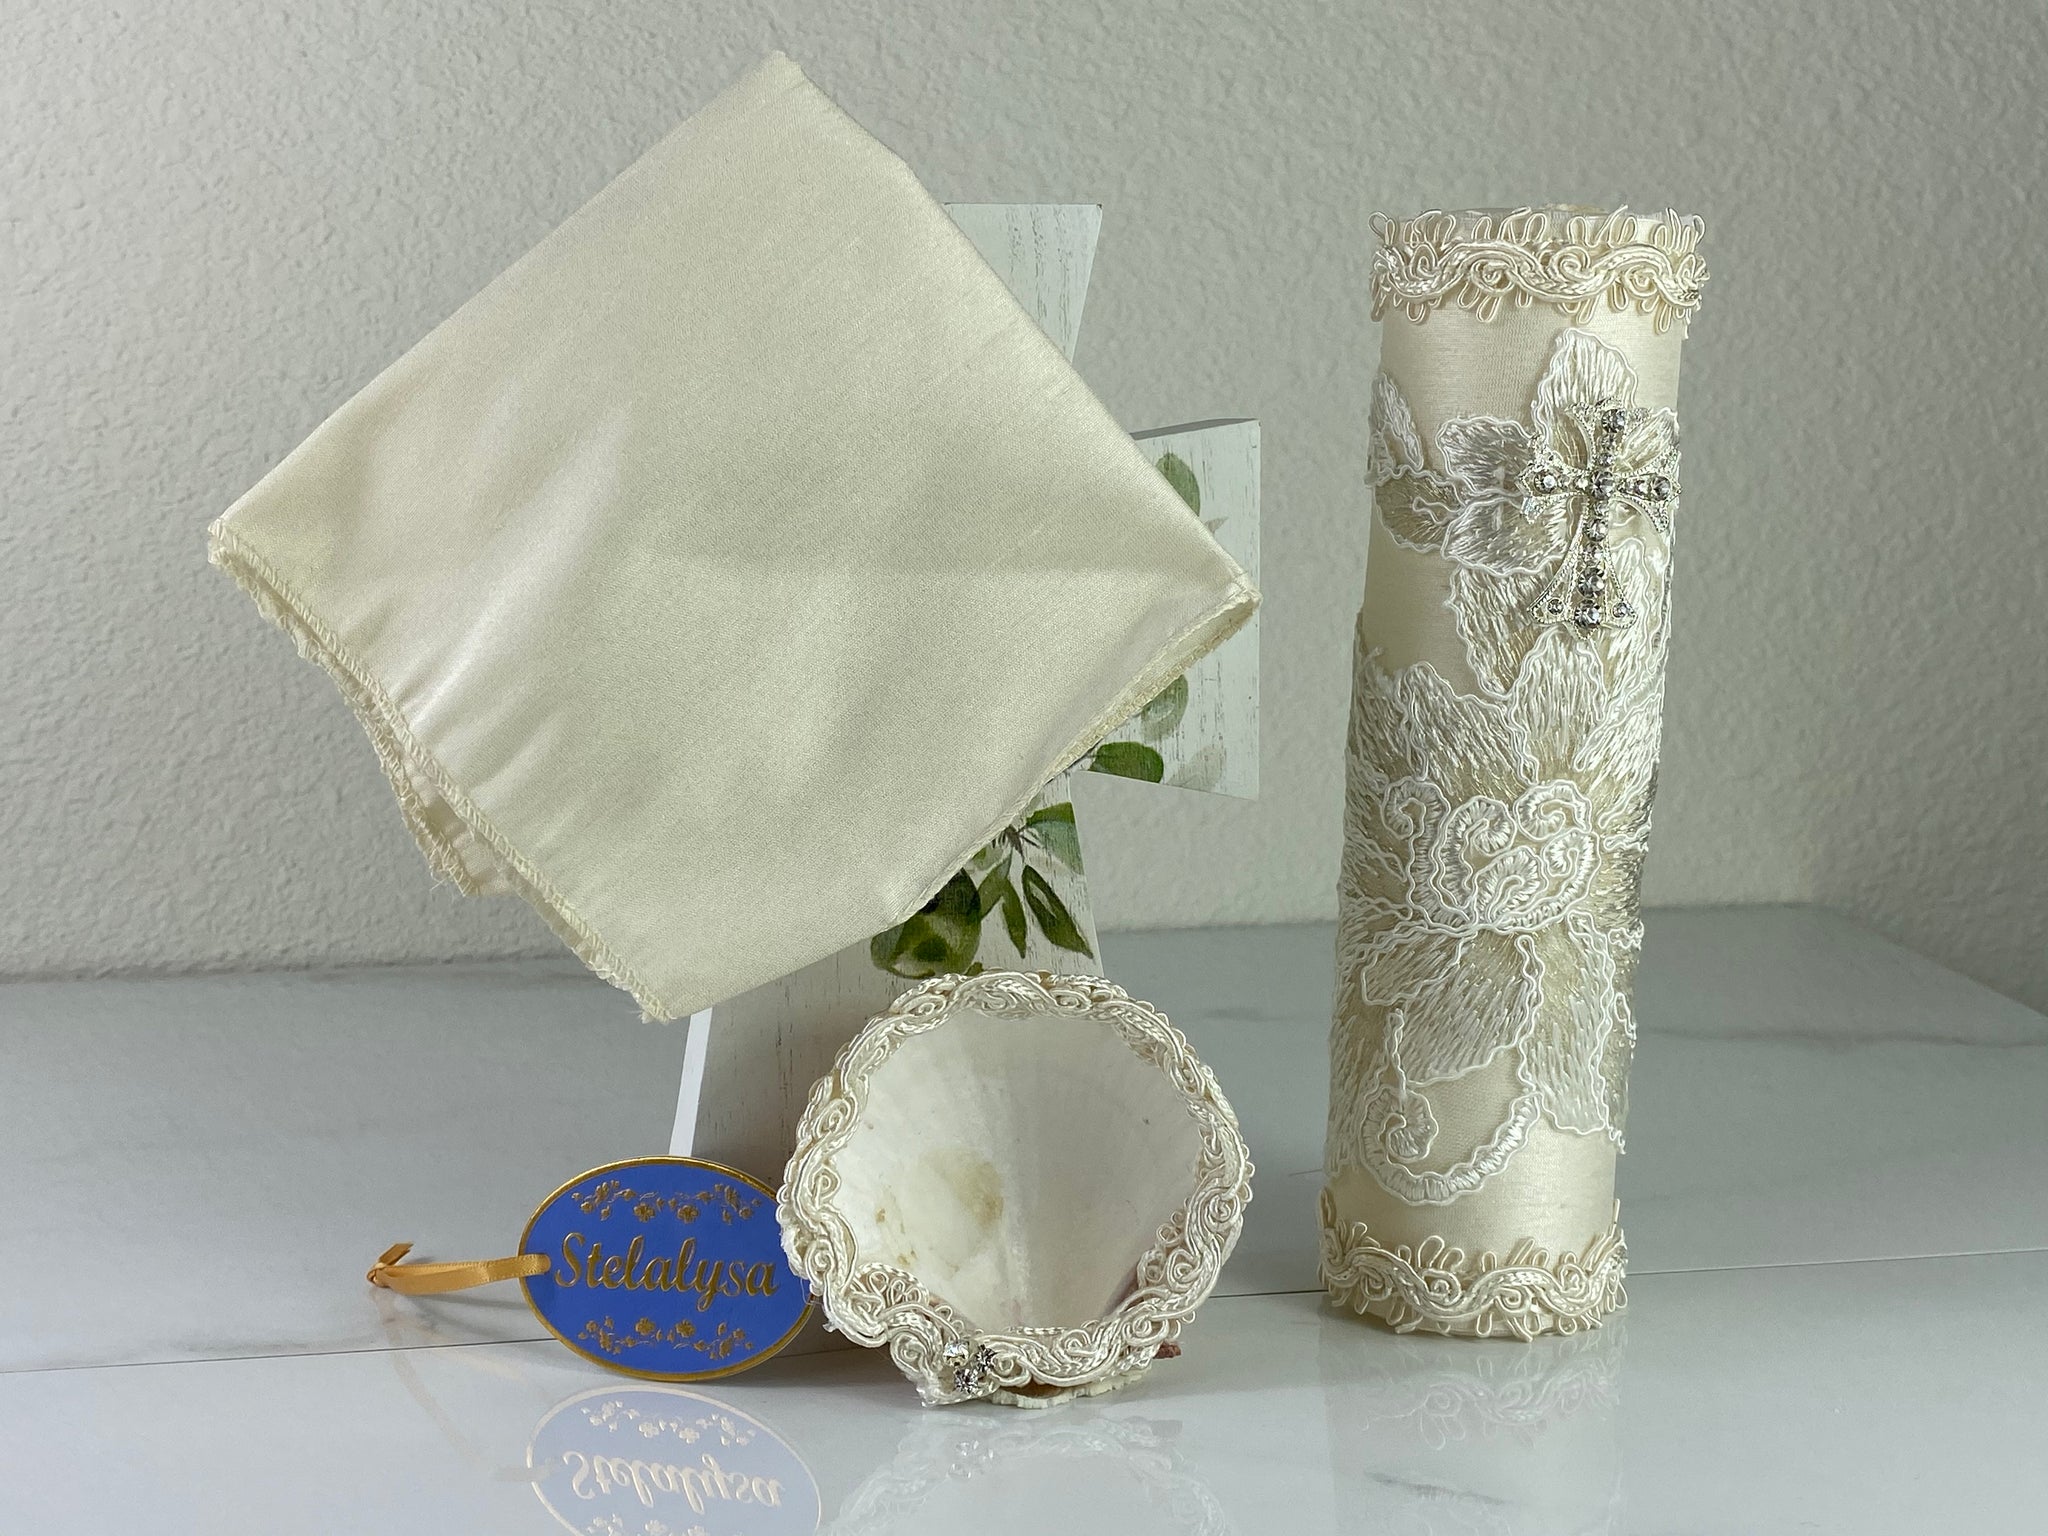 These one-of-a-kind Candle set is handmade and ivory in color.  This candle has a beautiful classic look.   It is beautifully wrapped in lace with a cross with crystals making it a gorgeous keepsake.   This candle is cylinder in shape.  To match, the shell is put together piece by piece to compliment the Candle and Handkerchief.  The Handkerchief is made of satin and embroidered lace to match the Shell and Candle beautifully.  